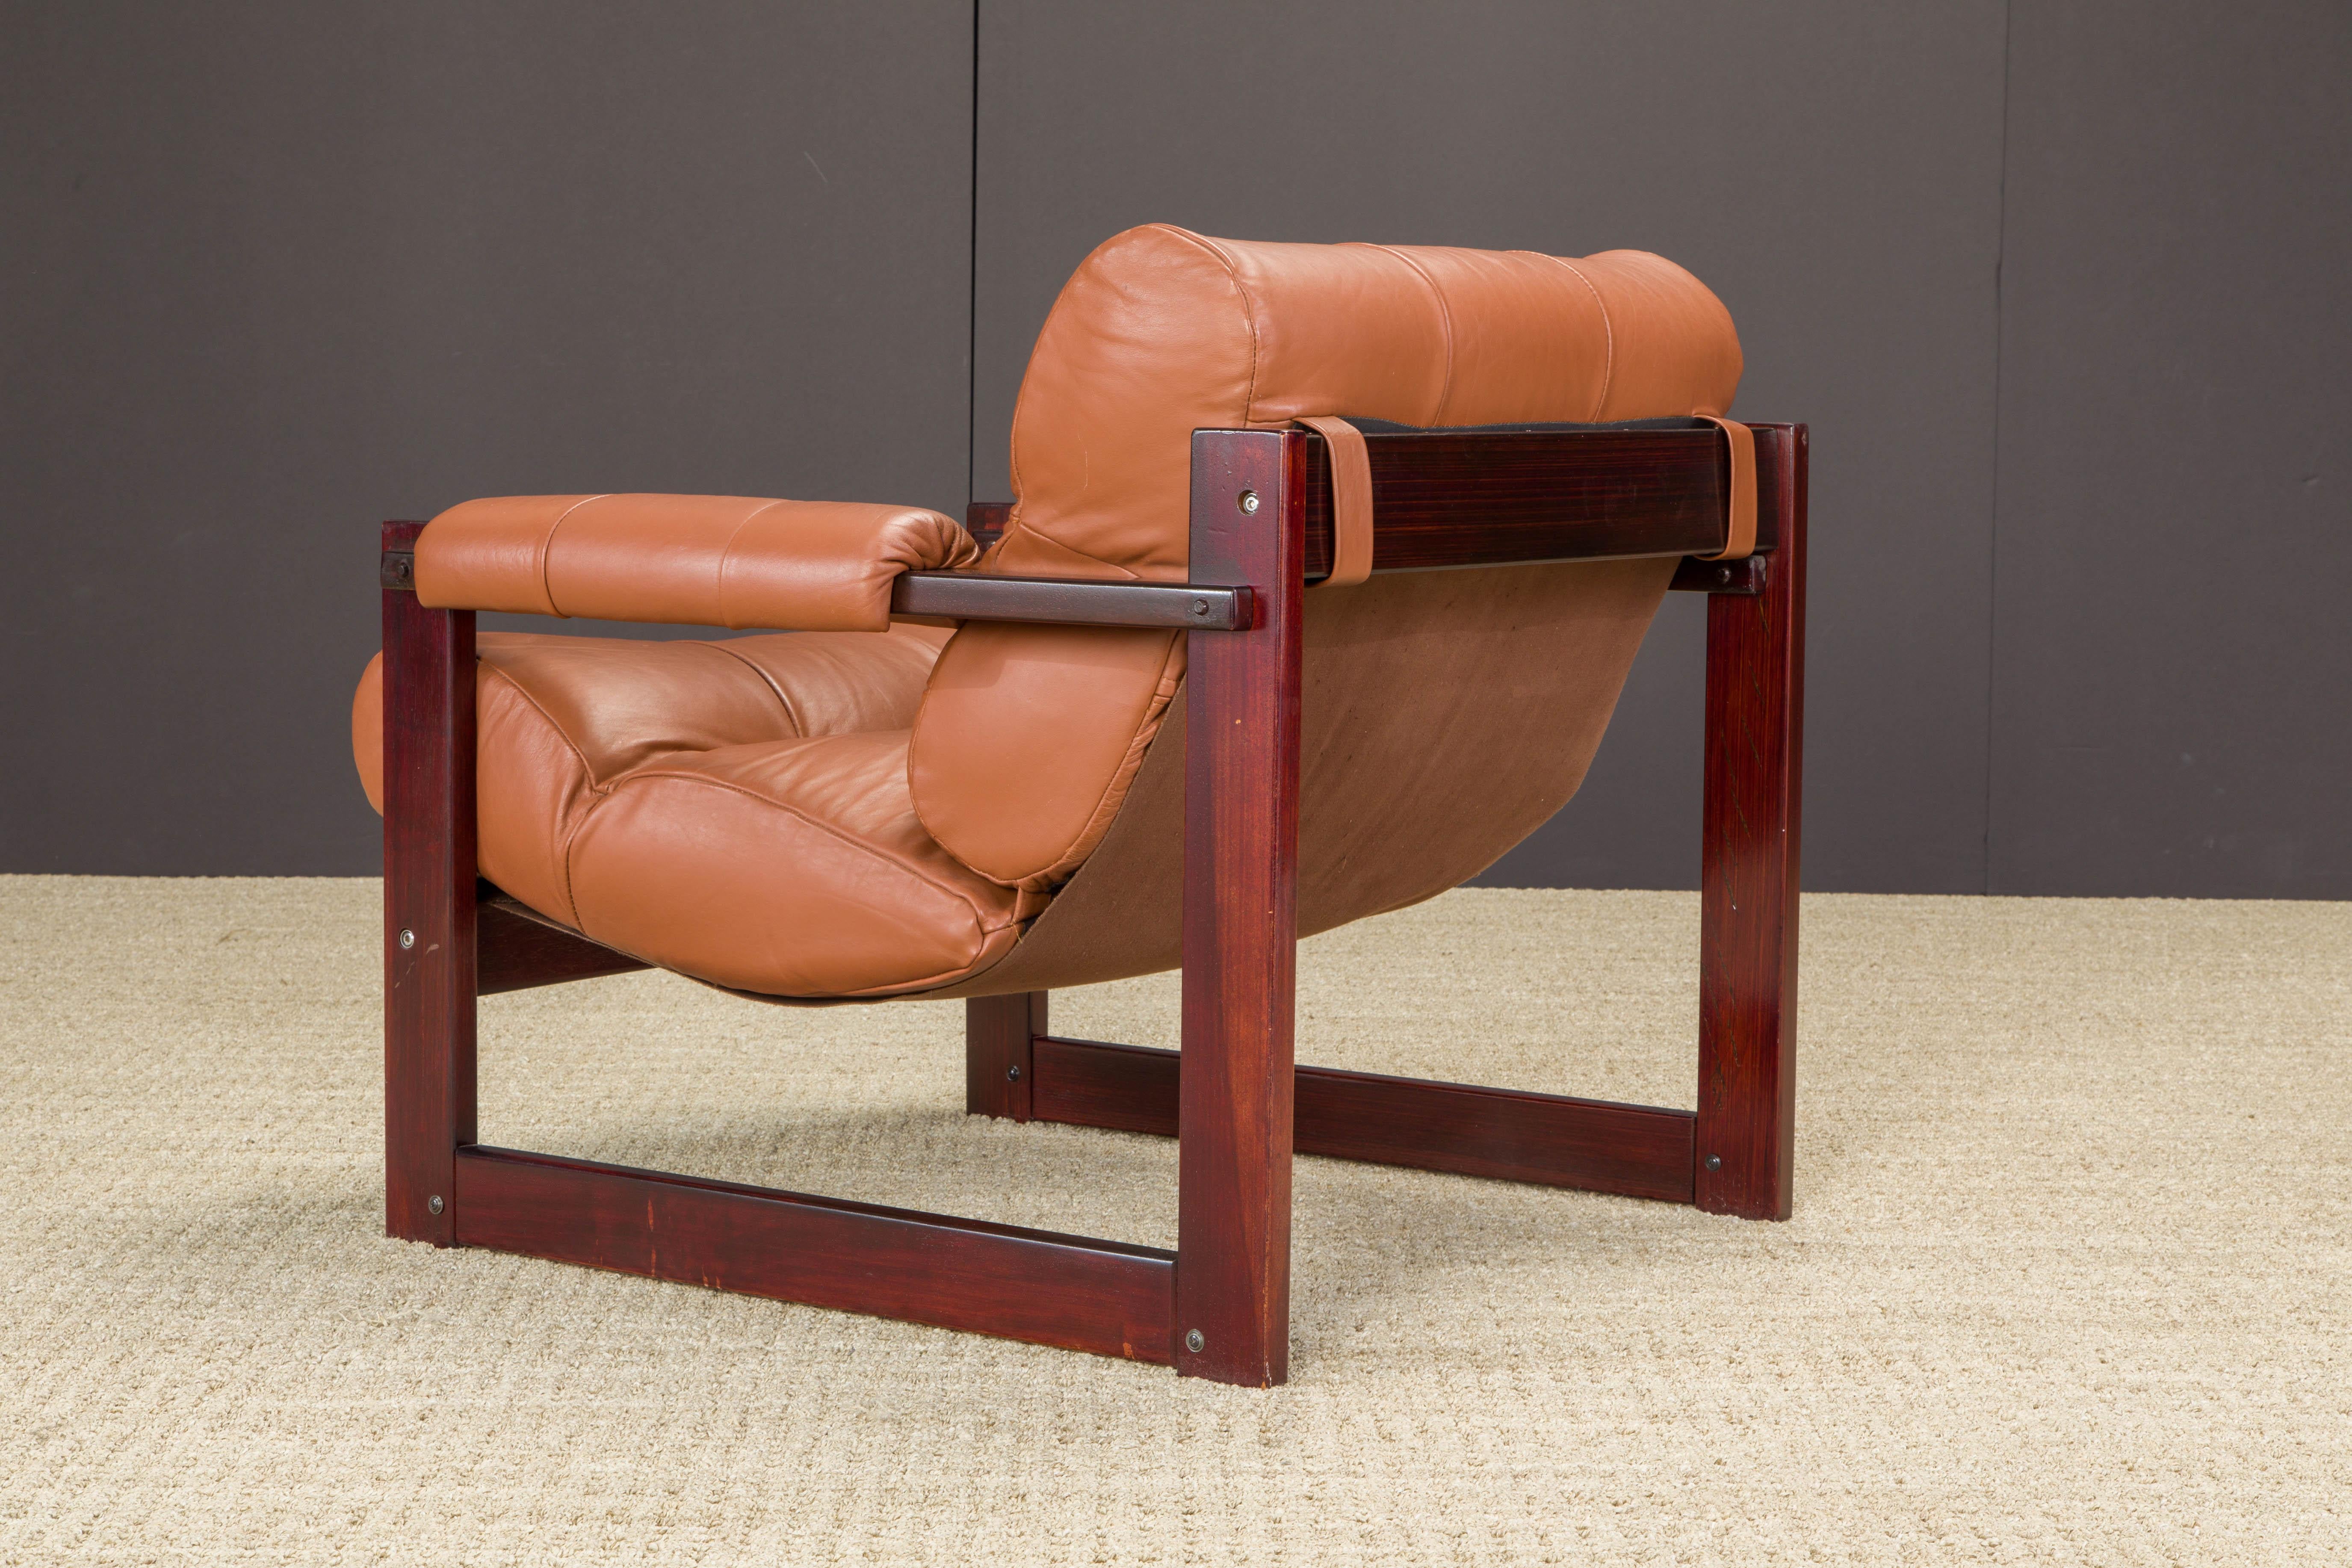 Percival Lafer 'S-1' Rosewood and Leather Lounge Chairs, Brazil, 1976, Signed For Sale 3